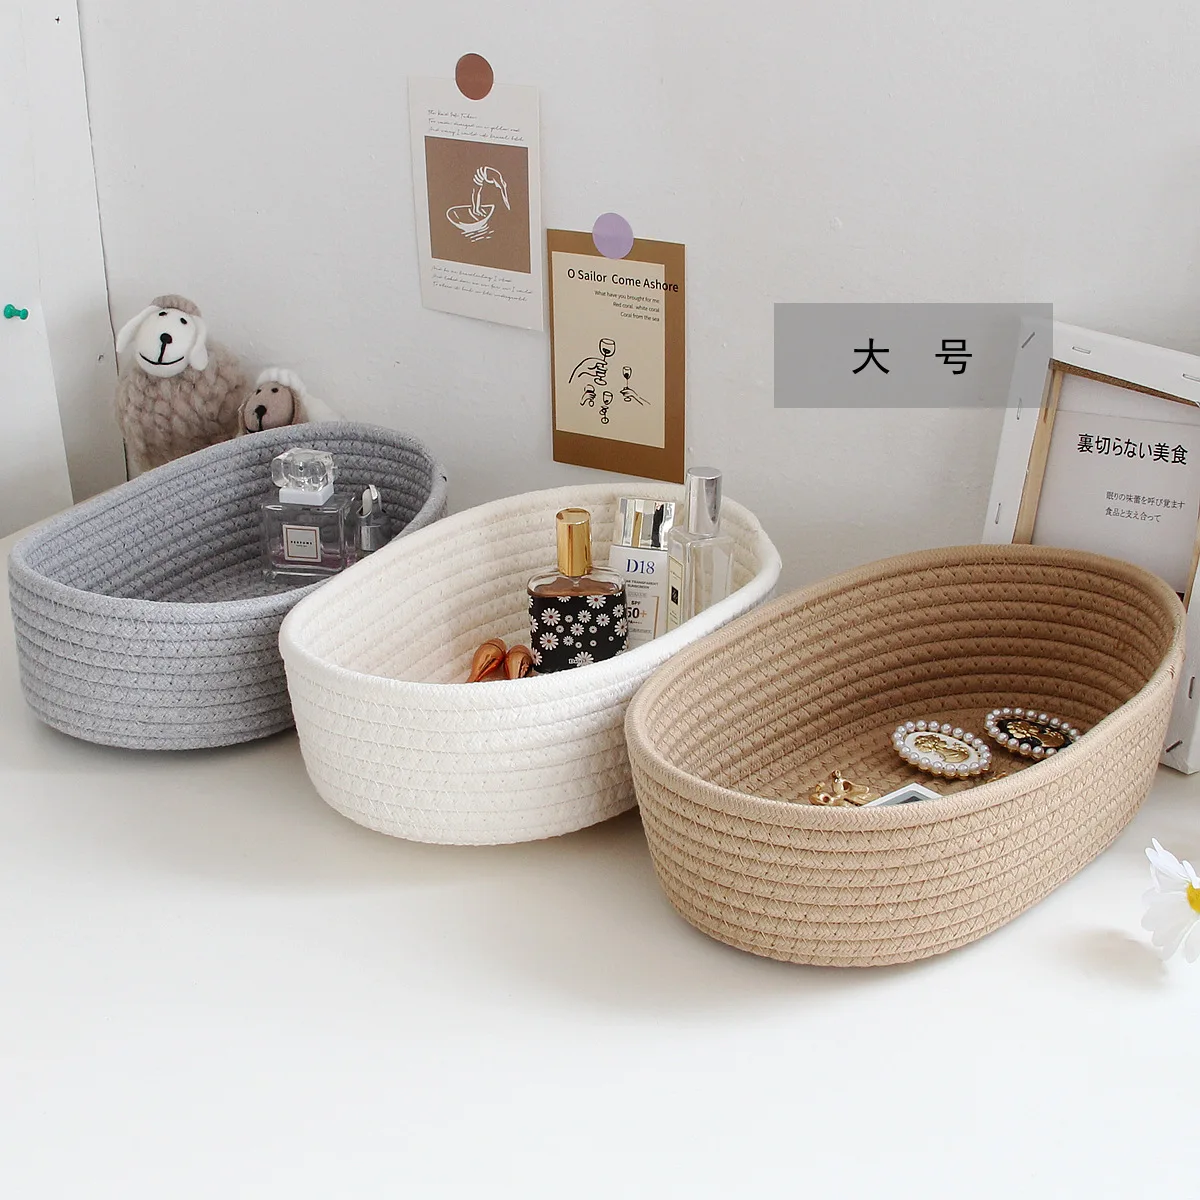 

Multifunctional Storage Baskets Woven Desktop Sundries Kids Toys Organizer Box Desk Stationery Does Not Occupy Space Boxes Items